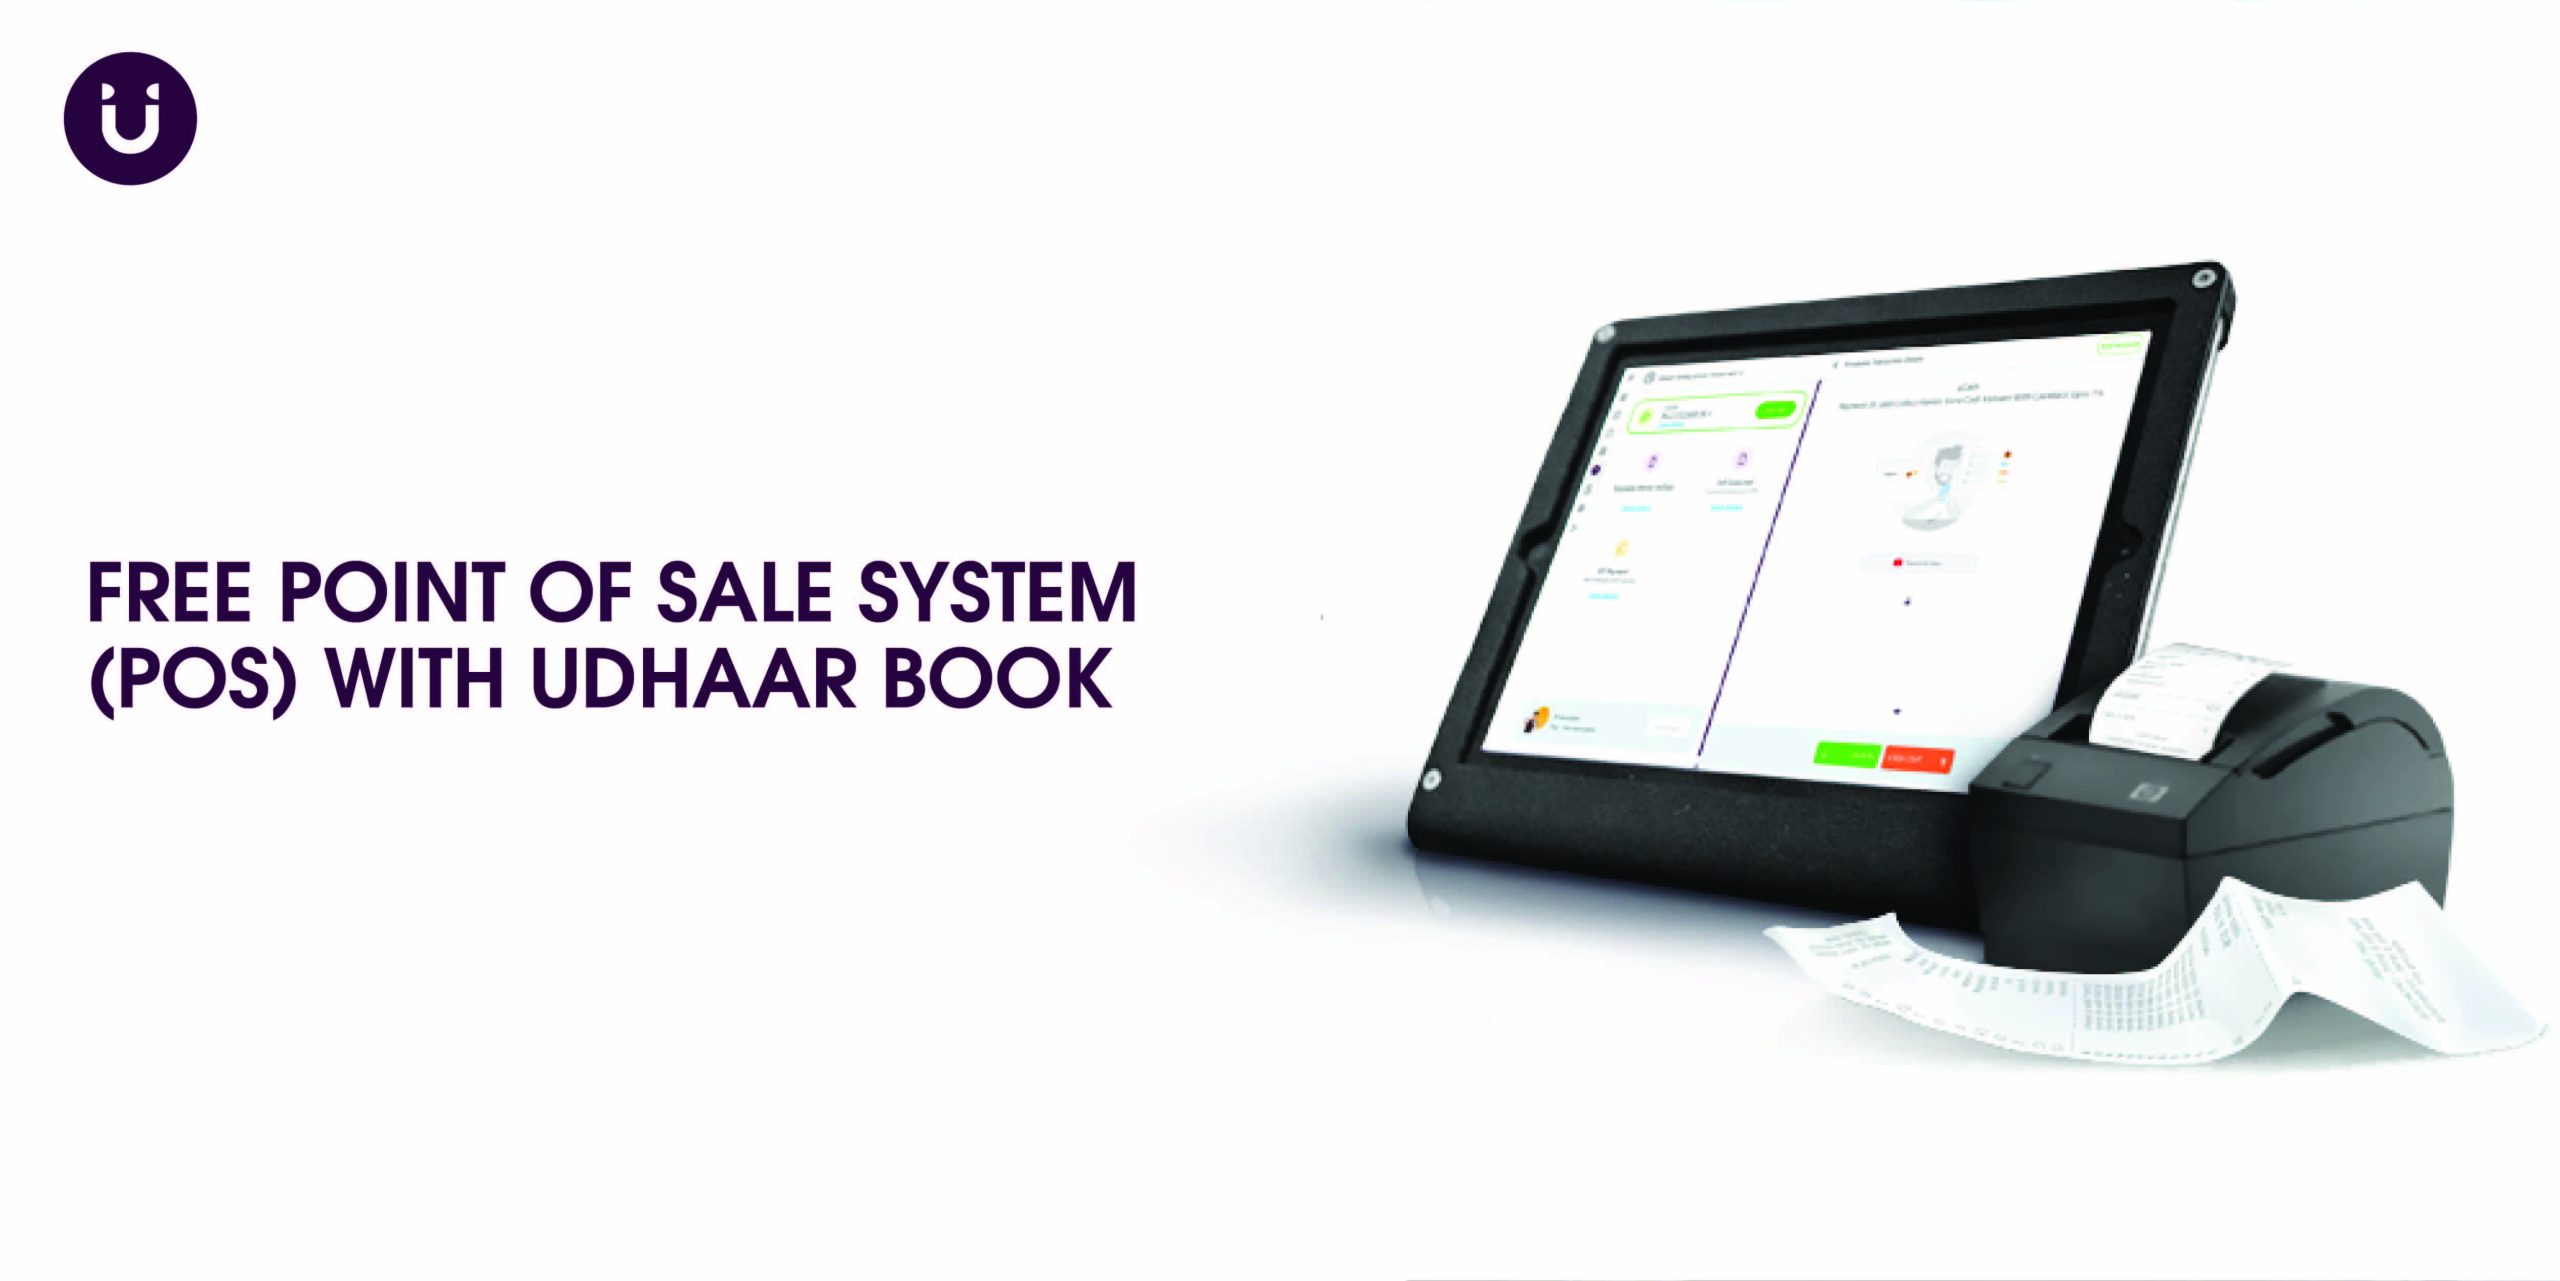 Free Point of Sale System (POS) with Udhaar Book